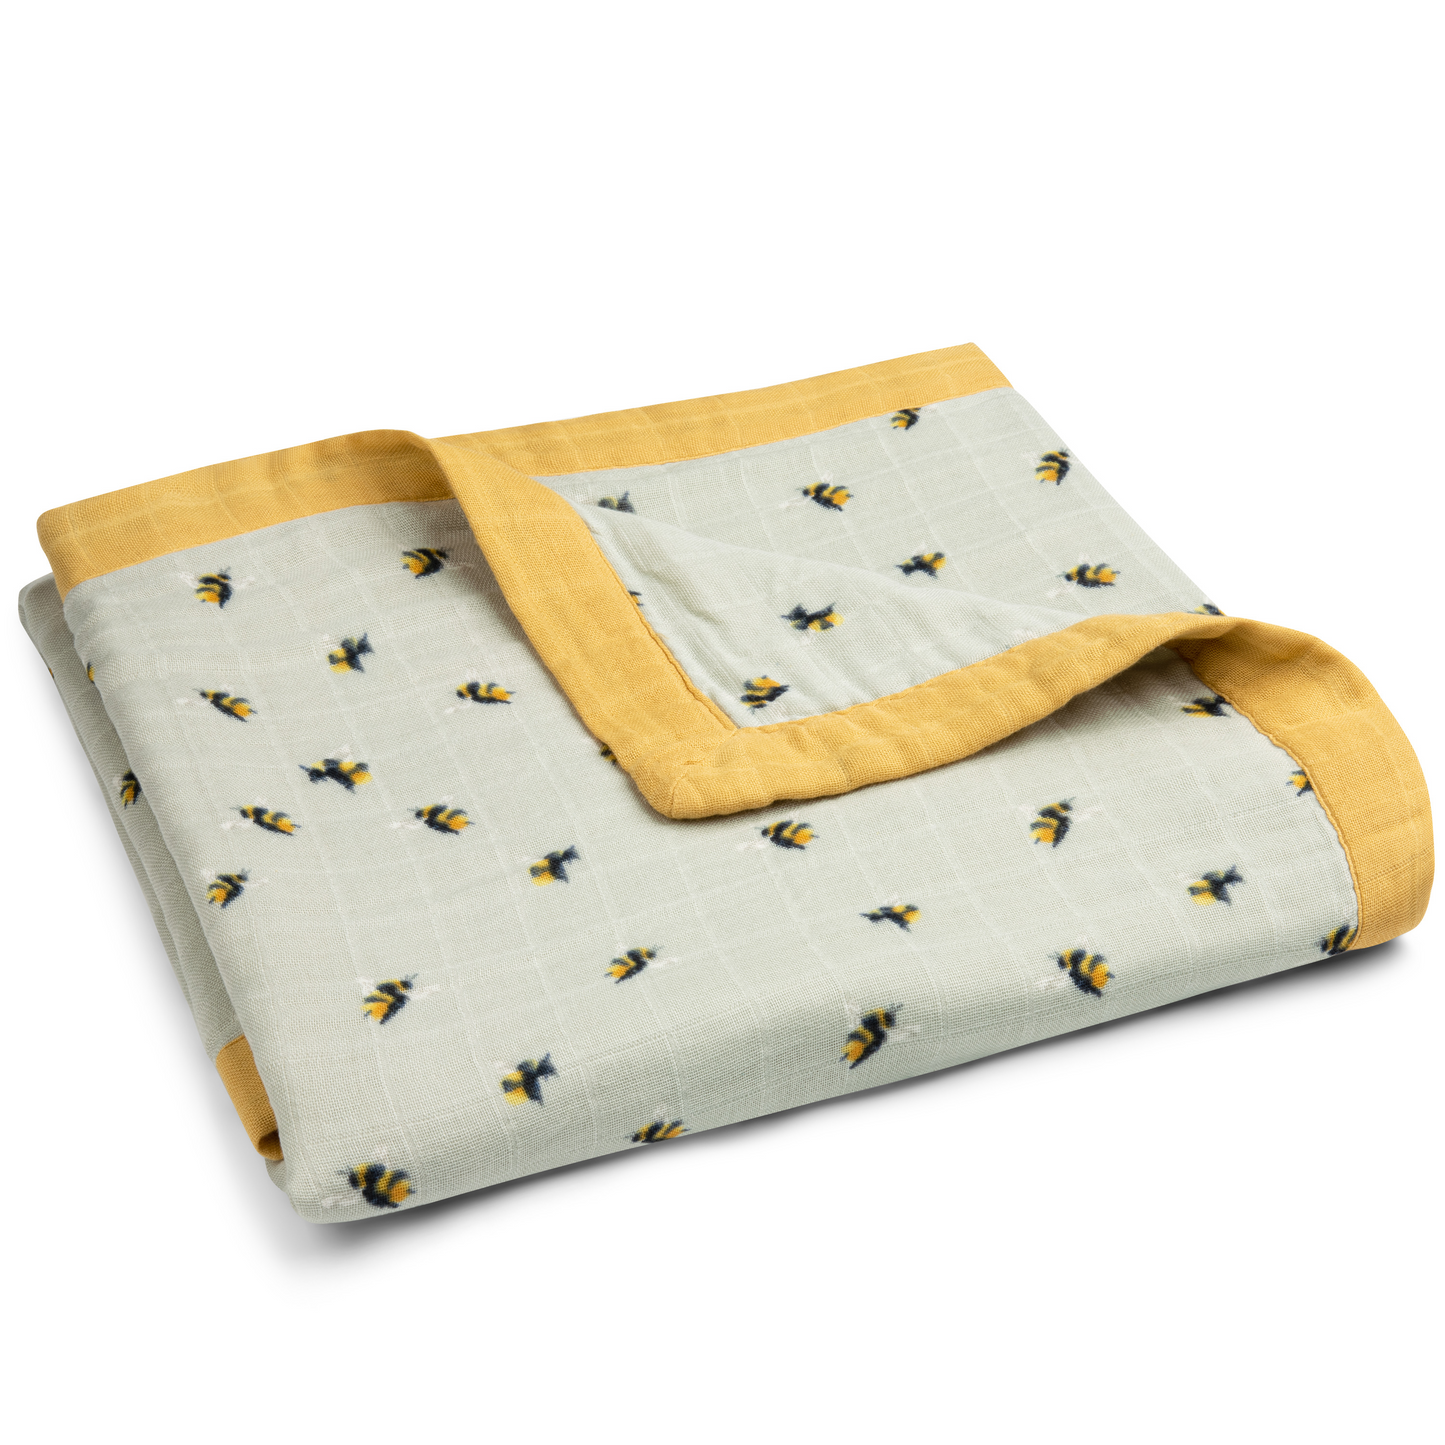 Bamboo Big Lovey Blanket in Bumblebees